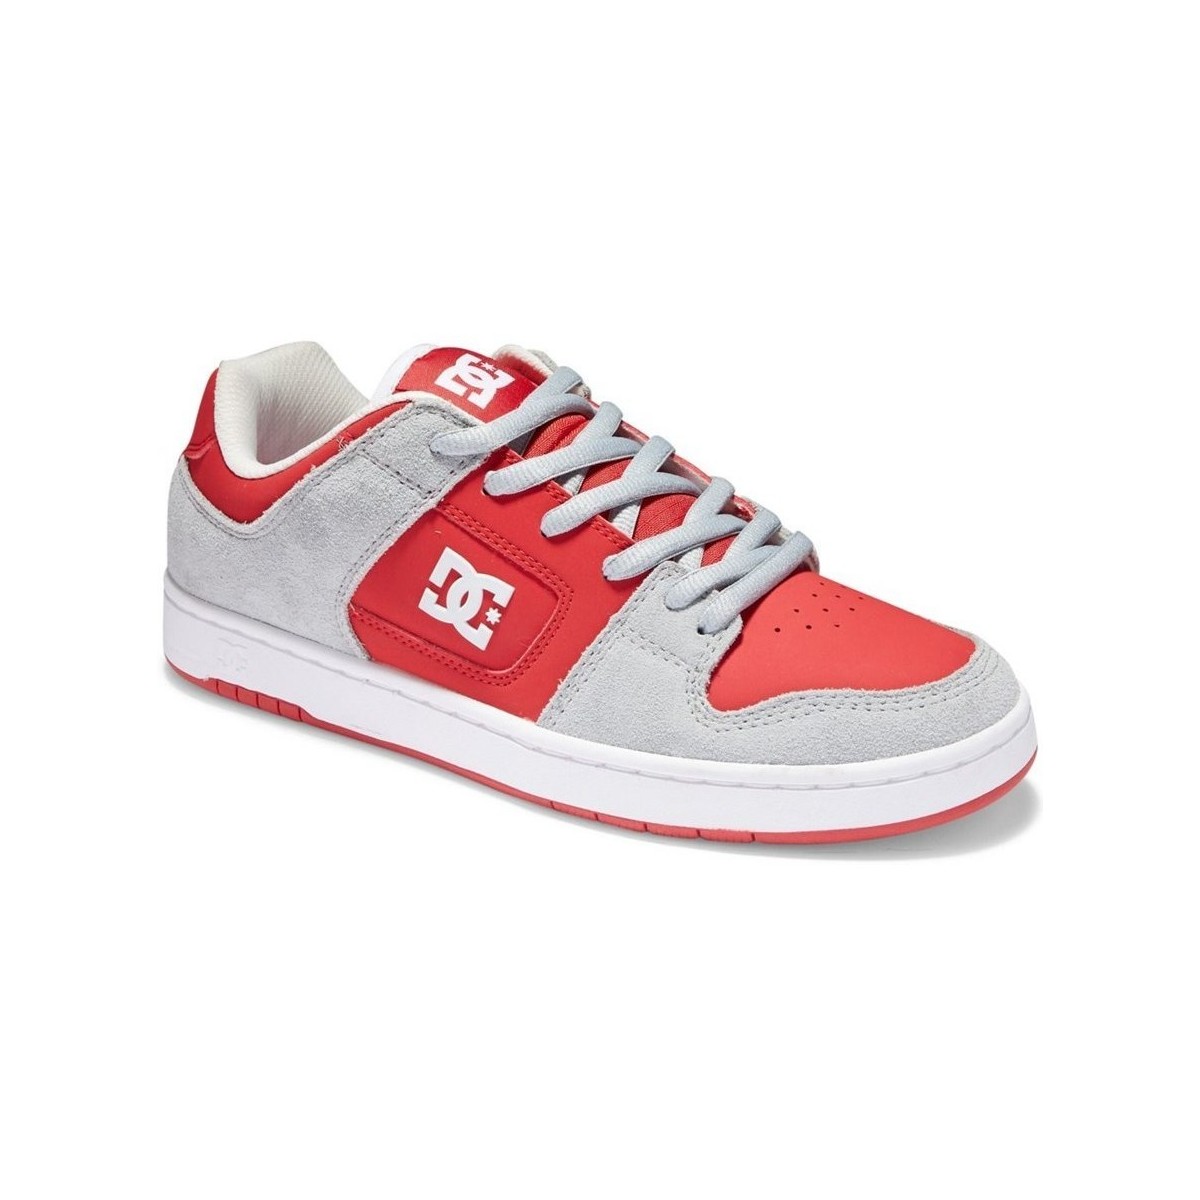 Chaussures Homme Baskets basses DC Shoes Manteca 4 Rgy Gris, Rouge